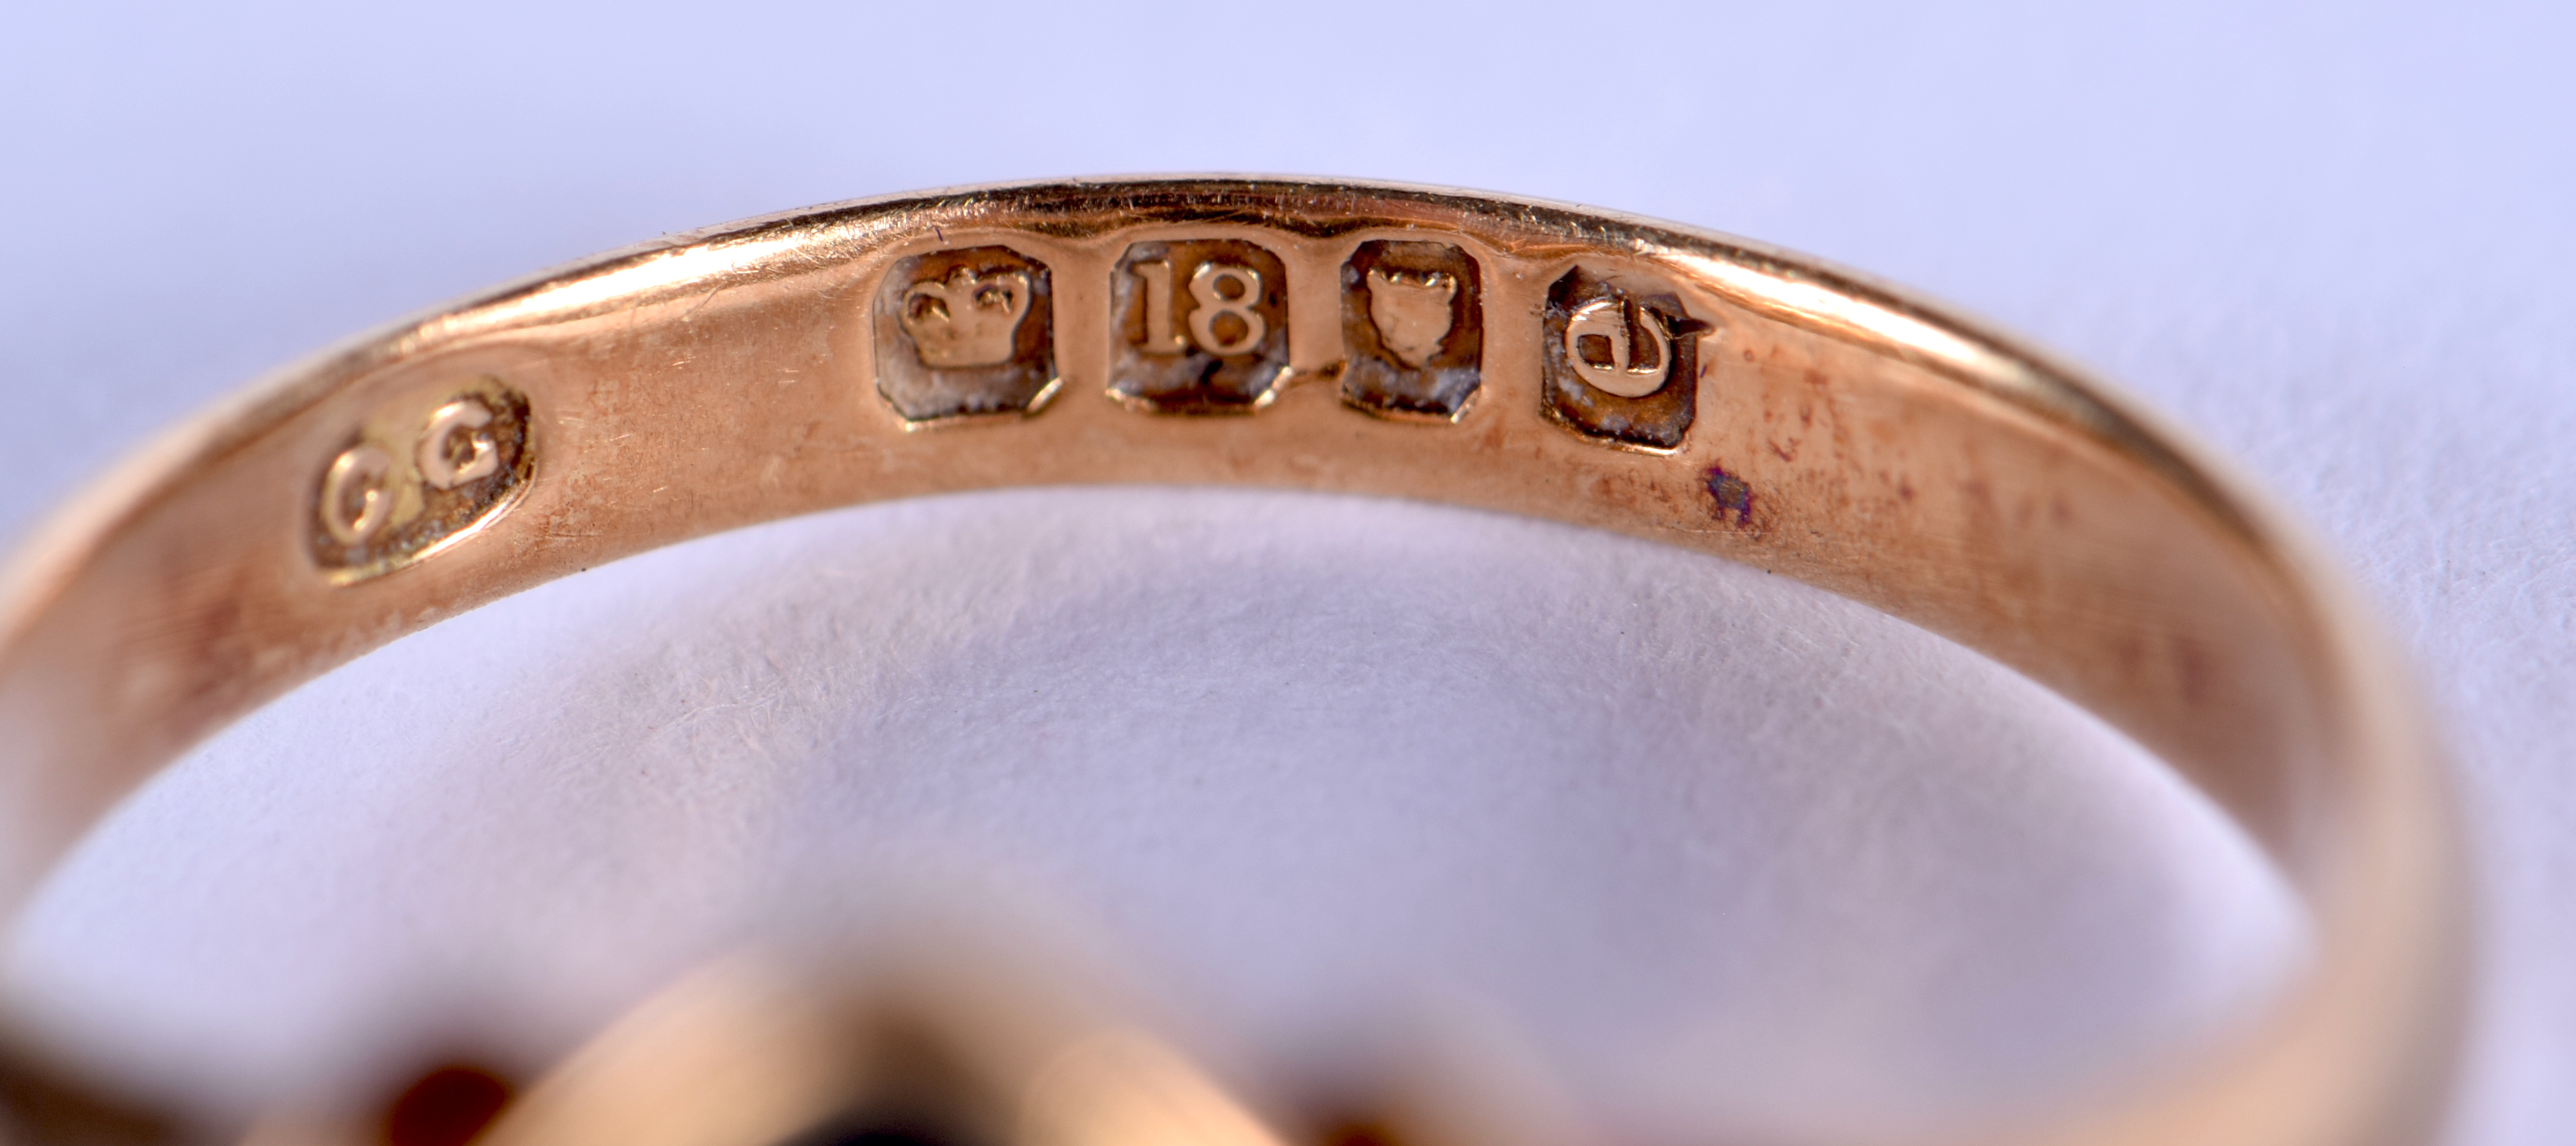 AN 18CT GOLD SHIELD RING. 3.3 grams. L. - Image 3 of 3